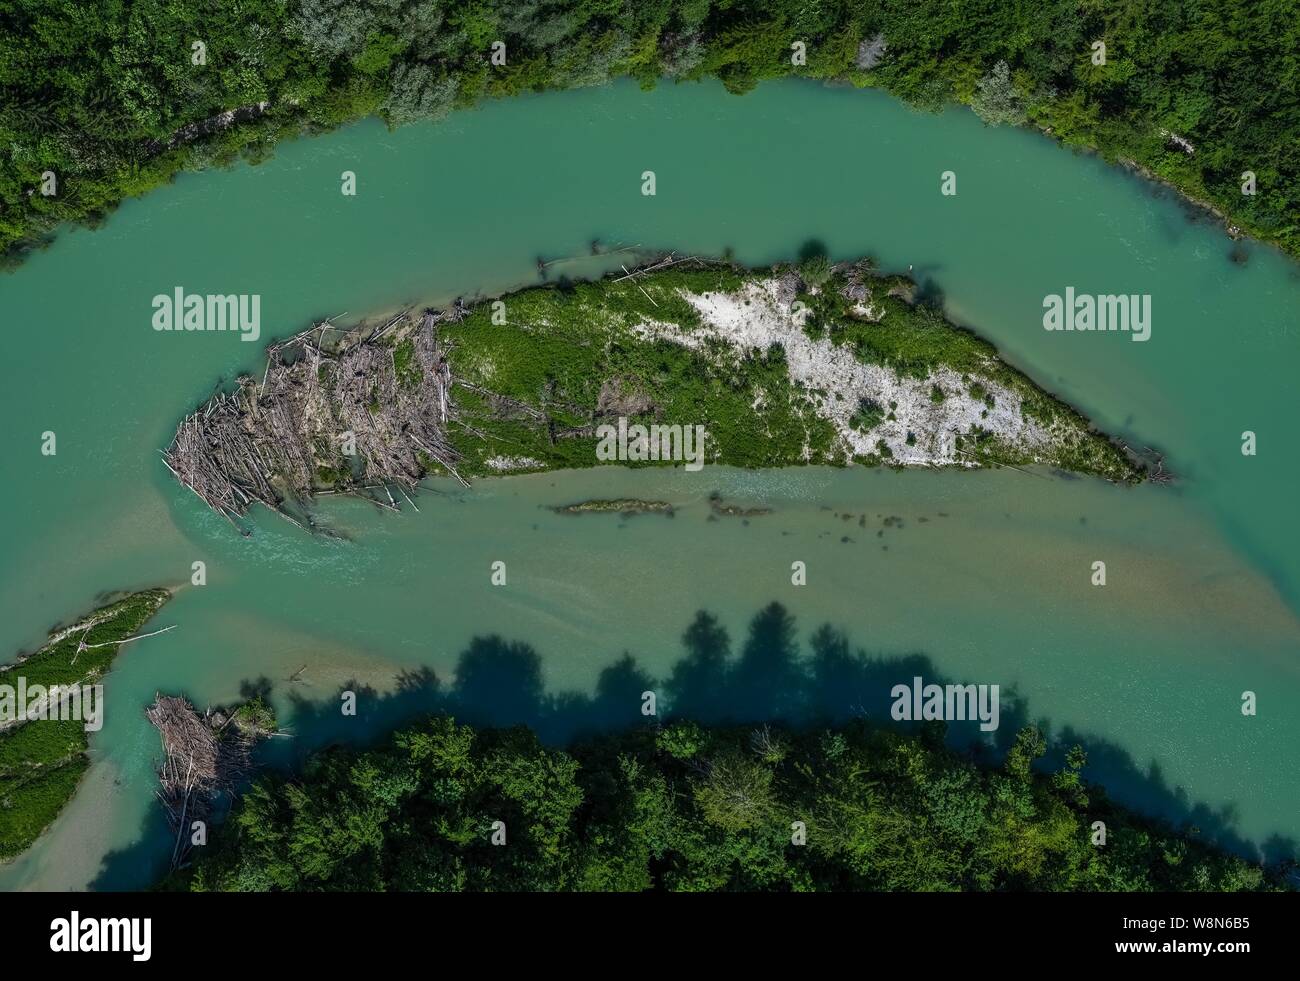 A lonely island in the Isar river in vertical view from a drone Stock Photo